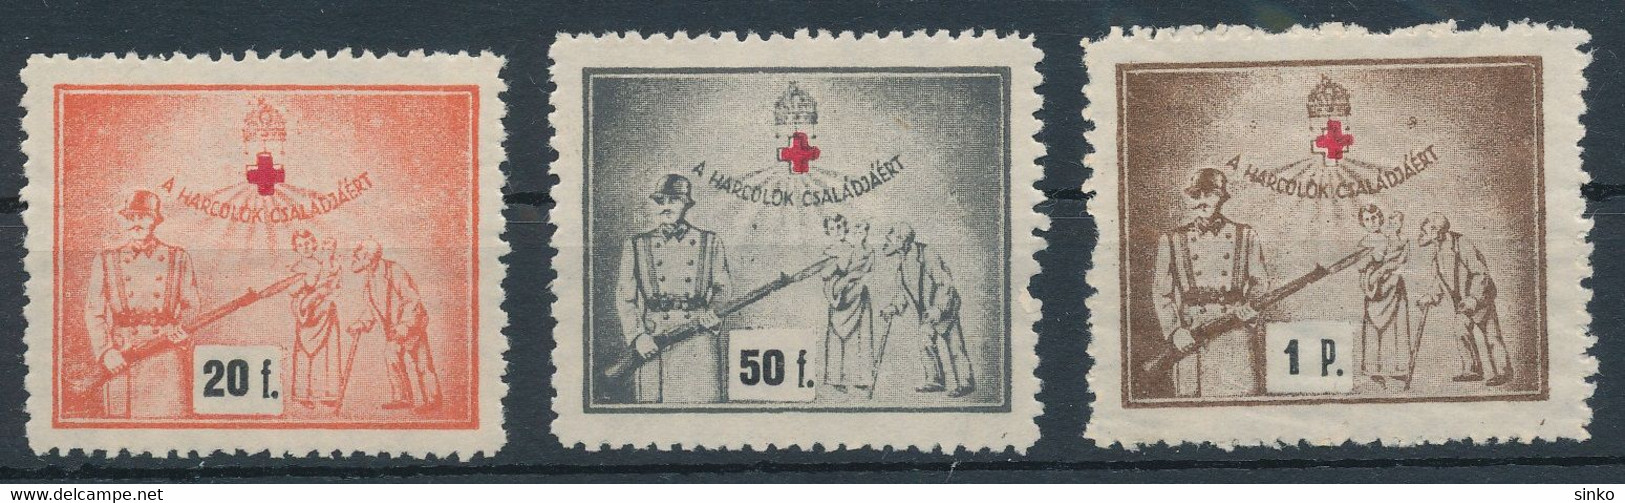 1940s Aid Stamps - Commemorative Sheets